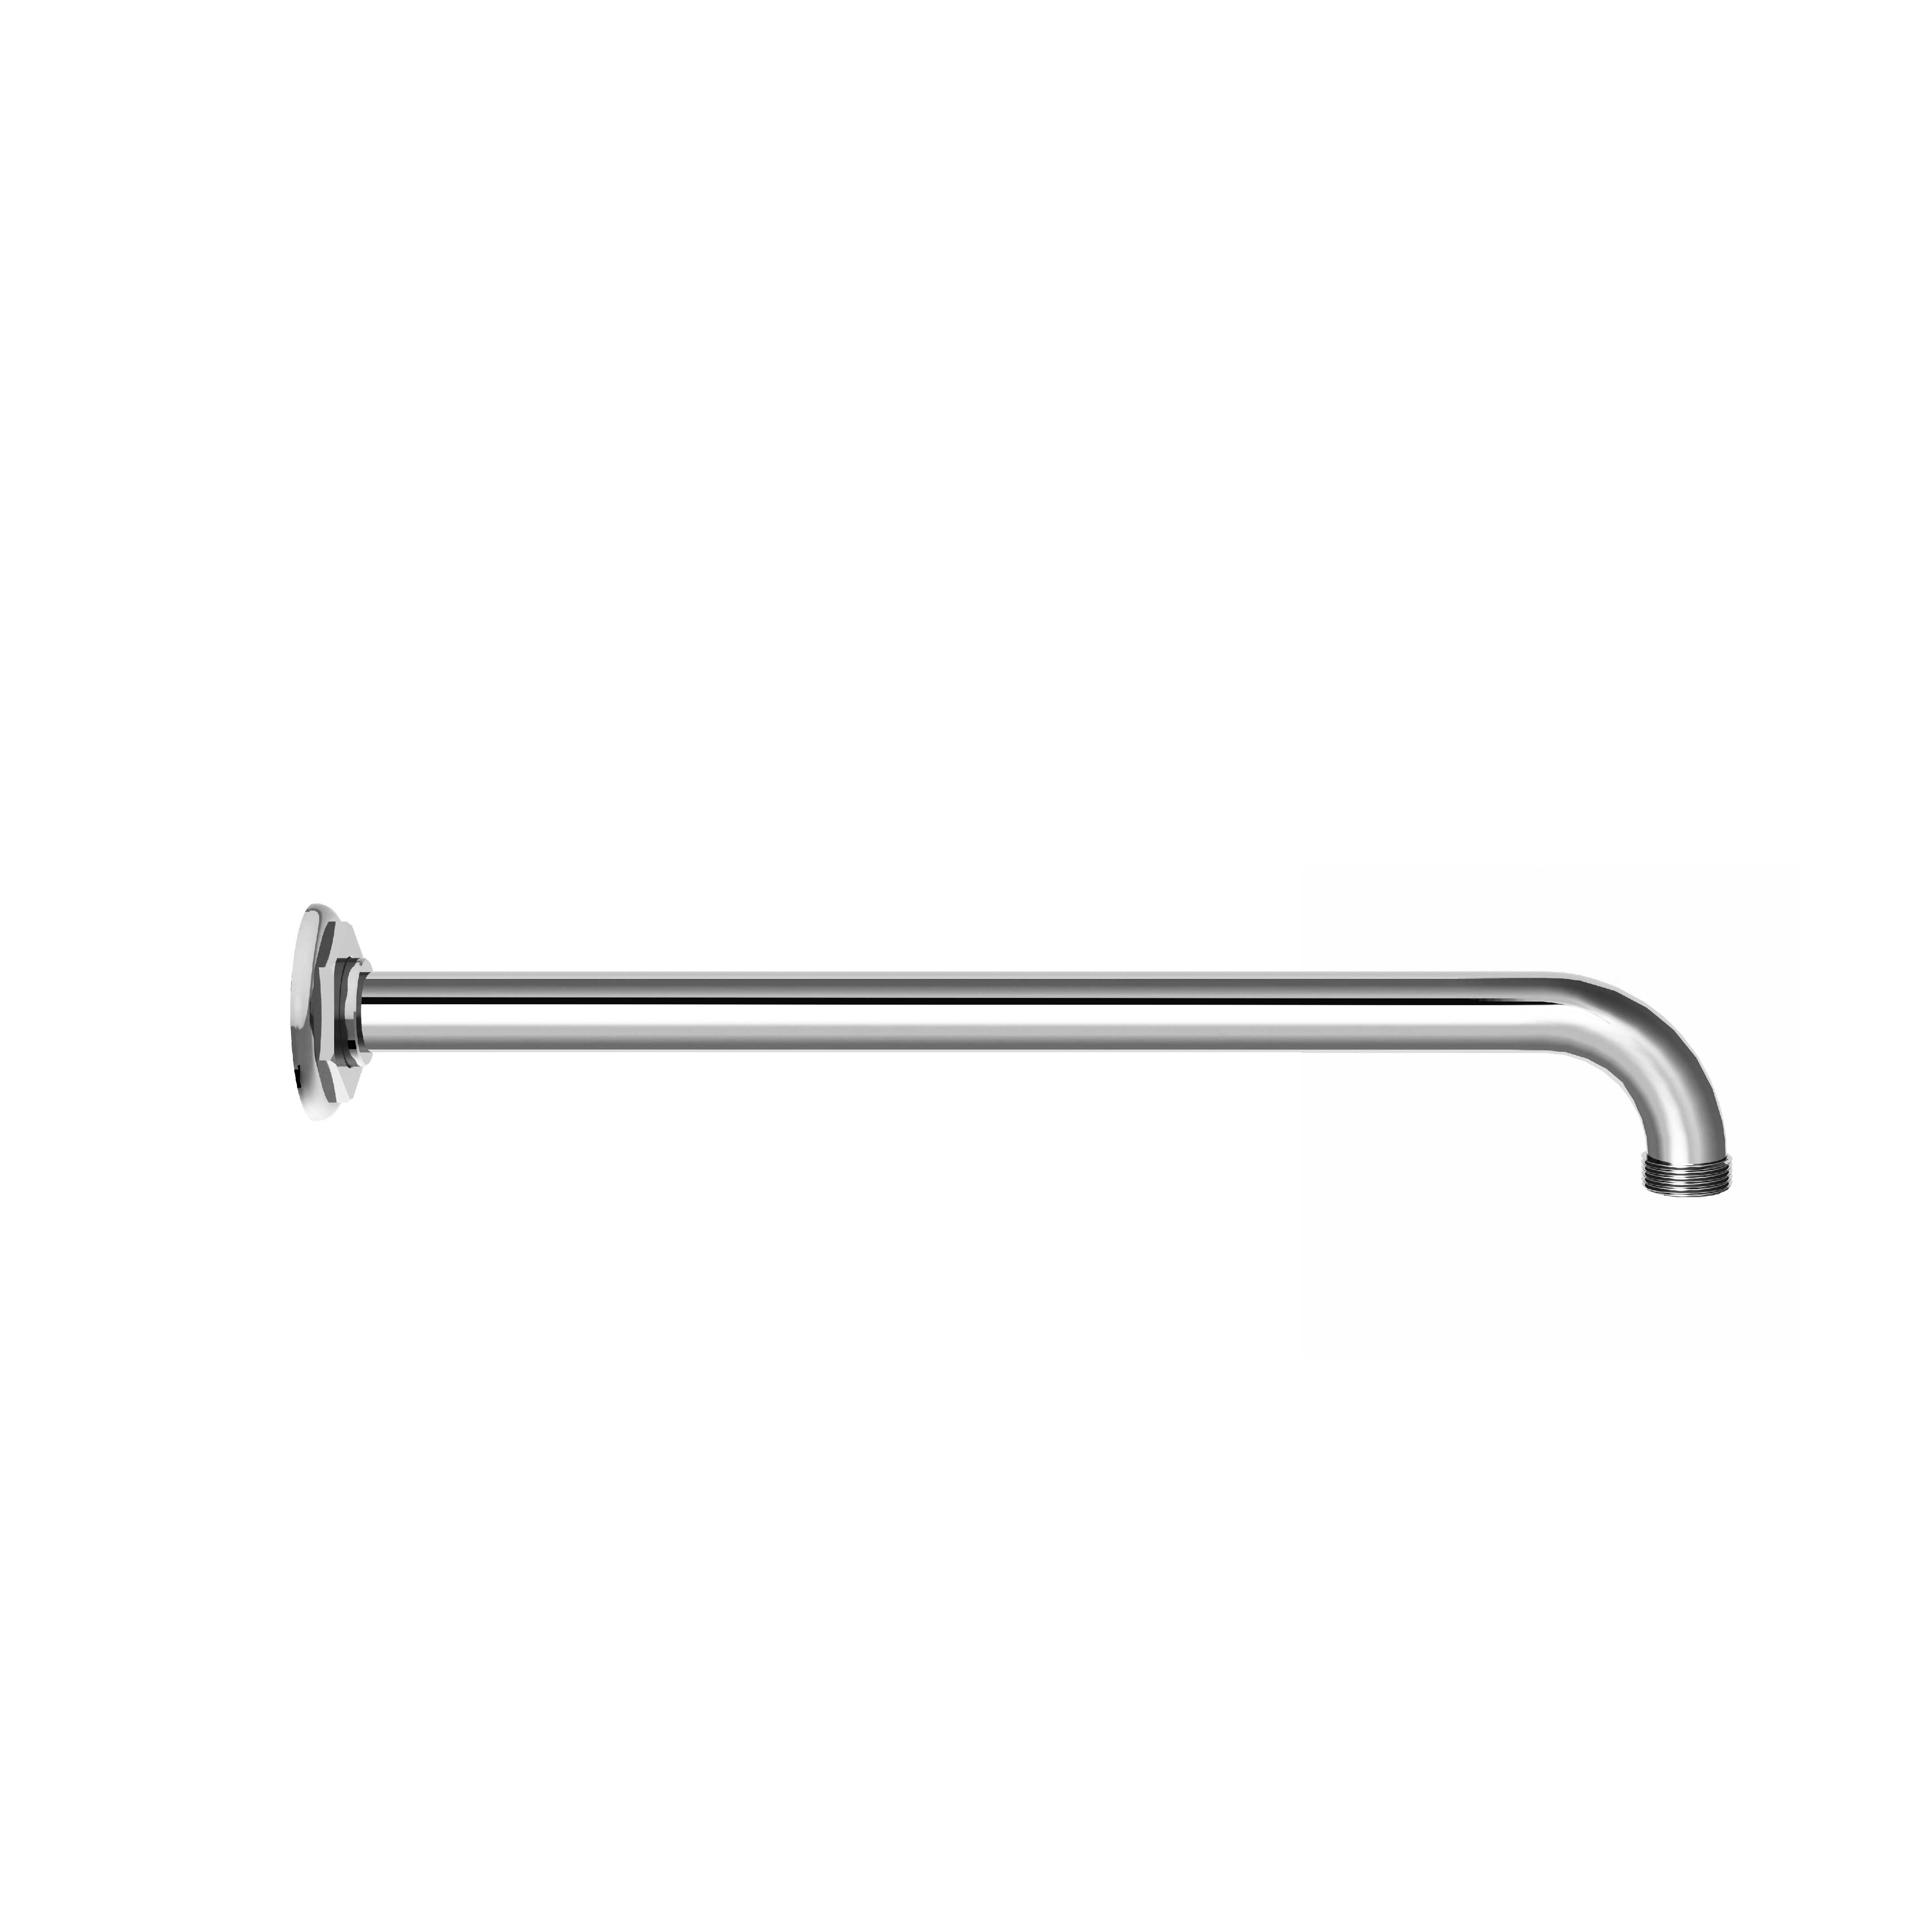 M81-2W301 Wall mounted shower arm 300mm